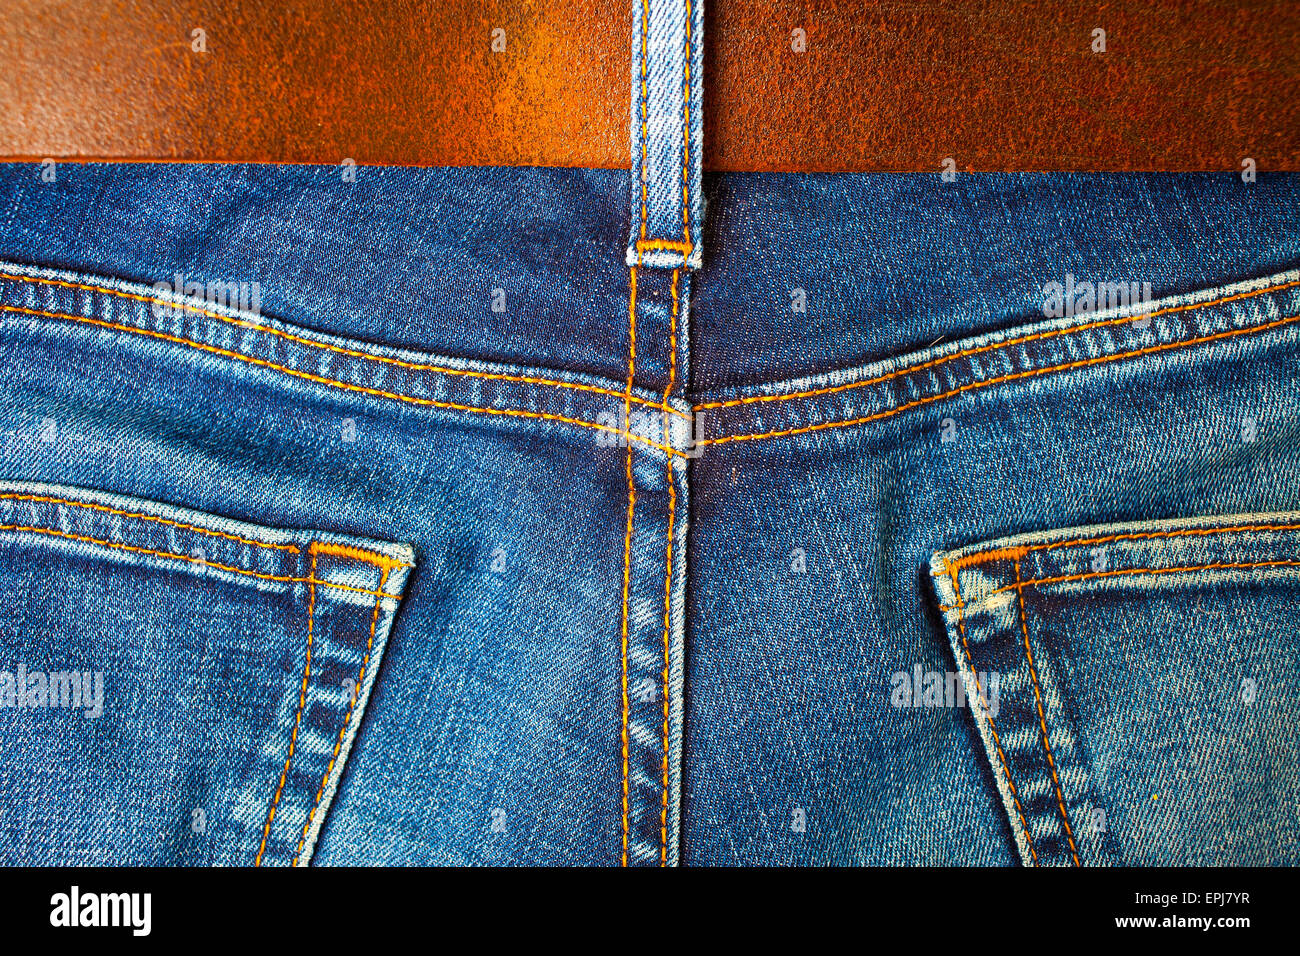 Aged jeans, back view Stock Photo